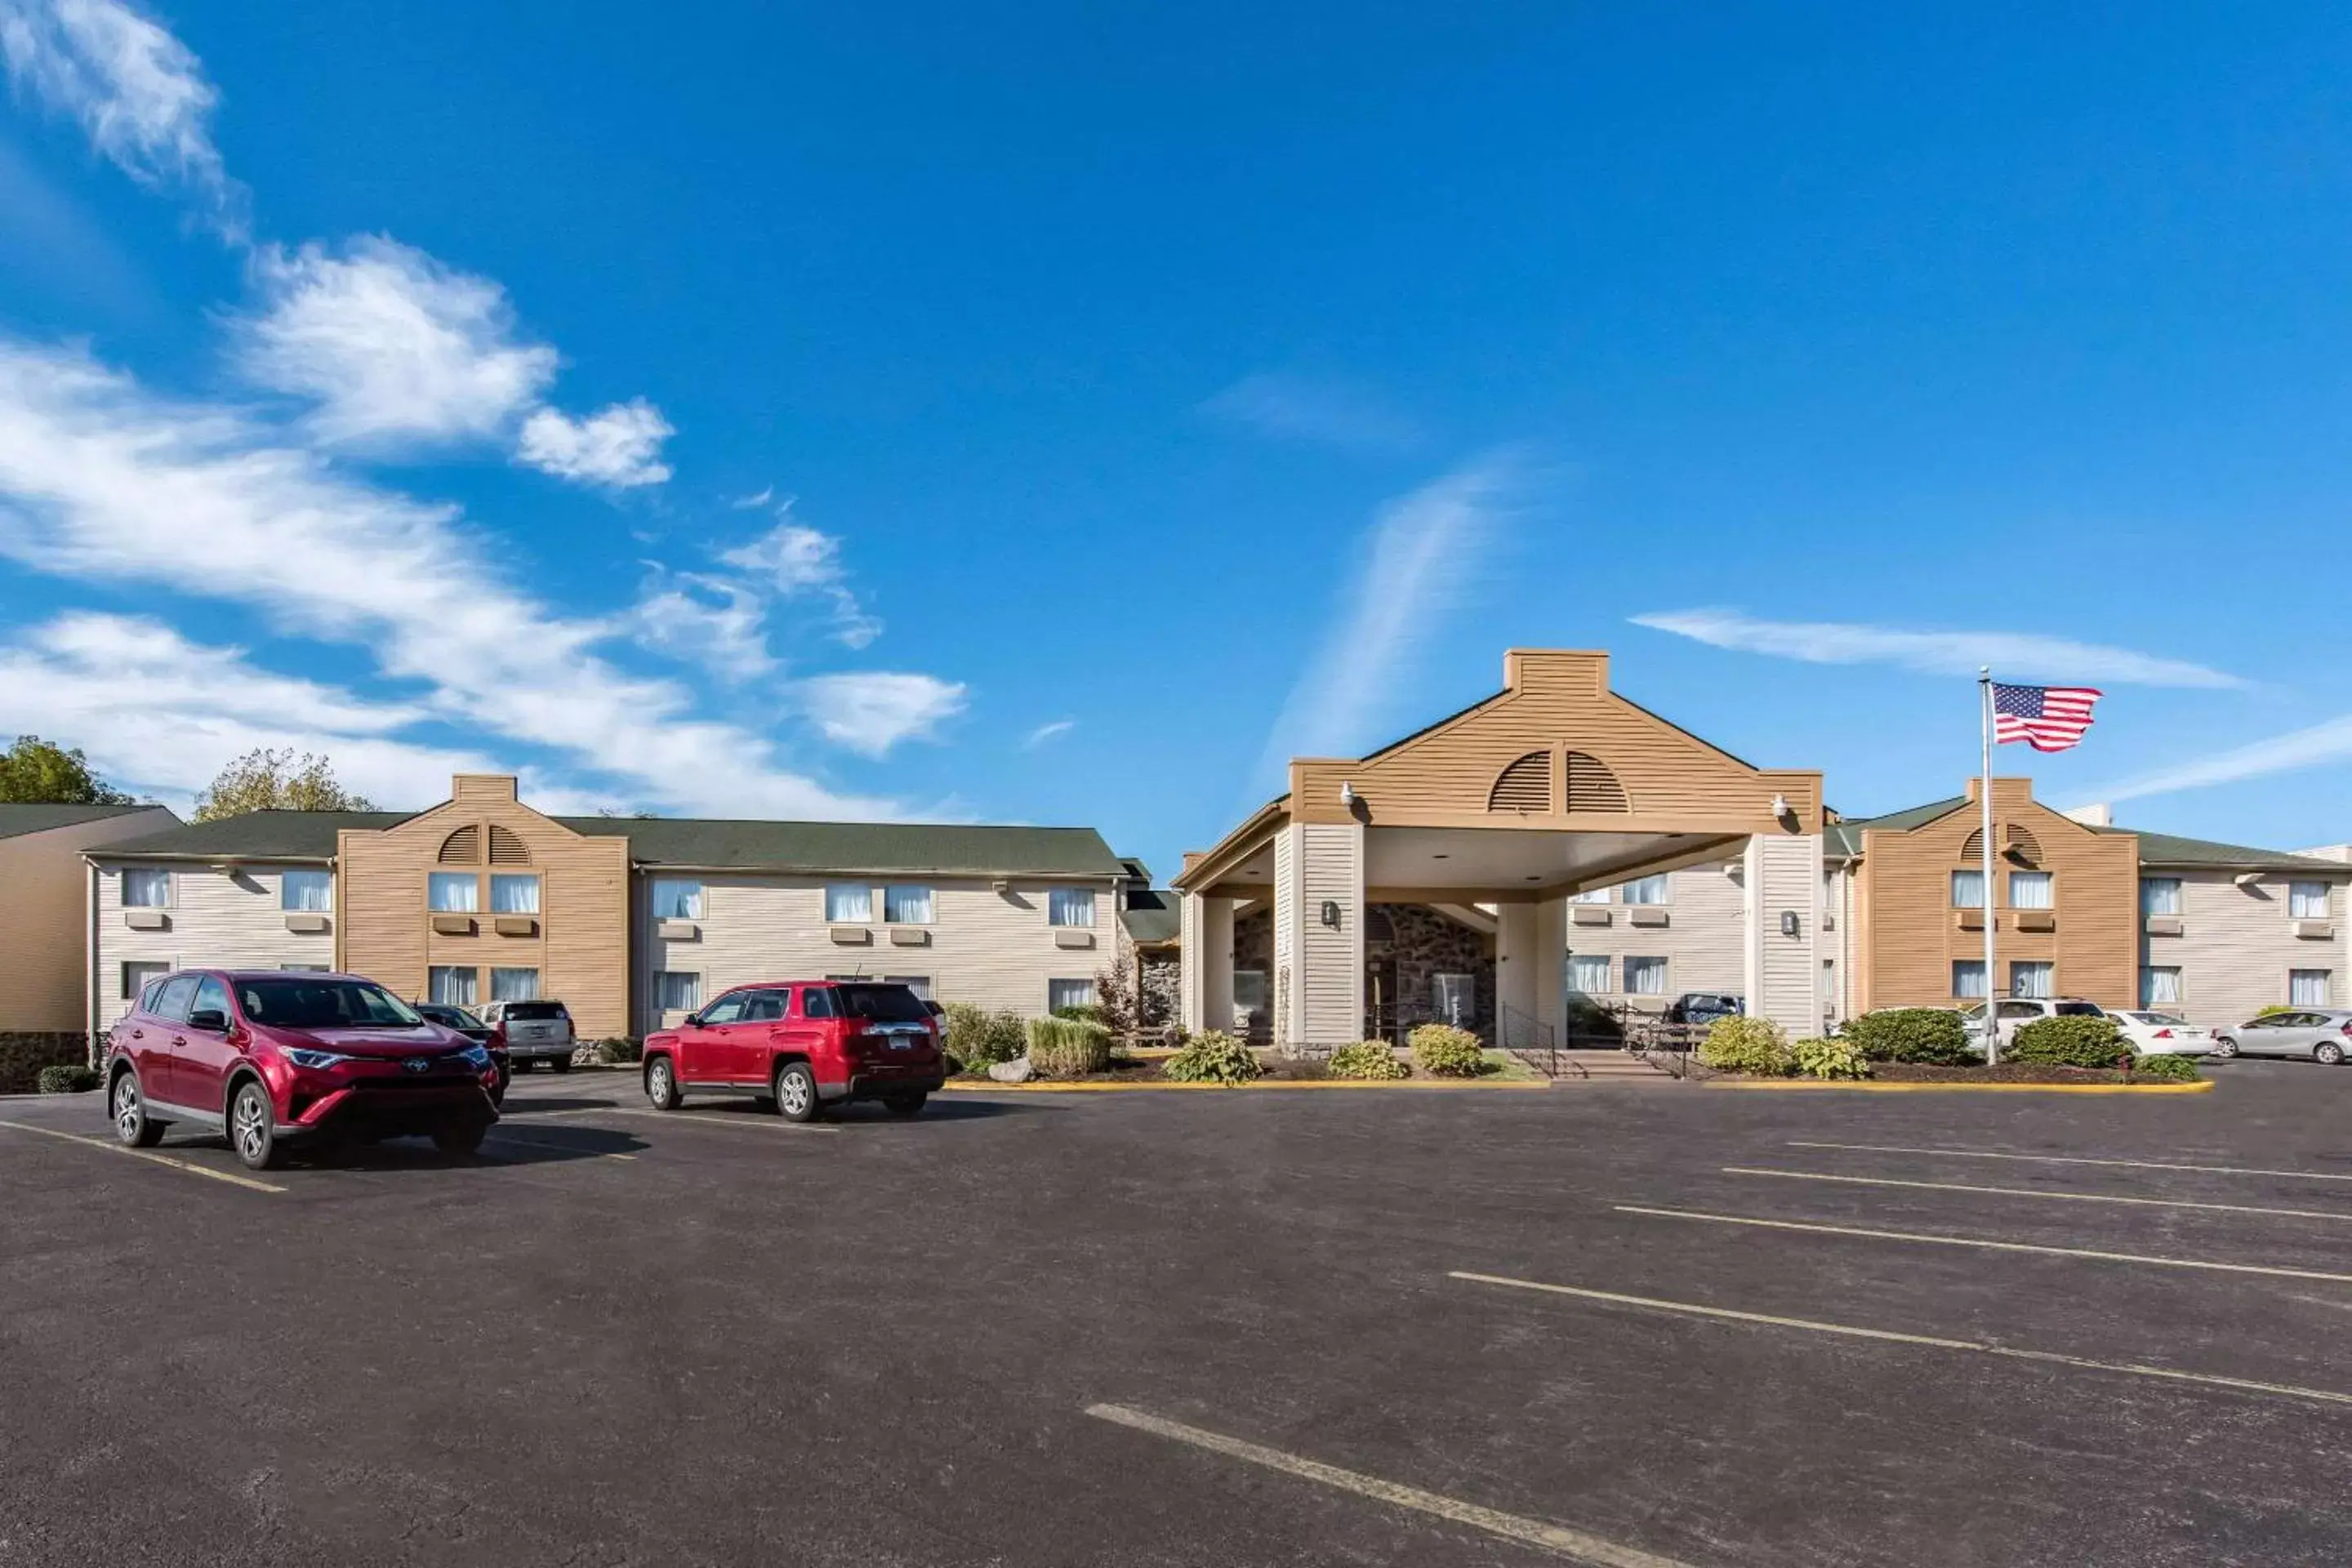 Property building, Neighborhood in Quality Inn & Suites New Castle